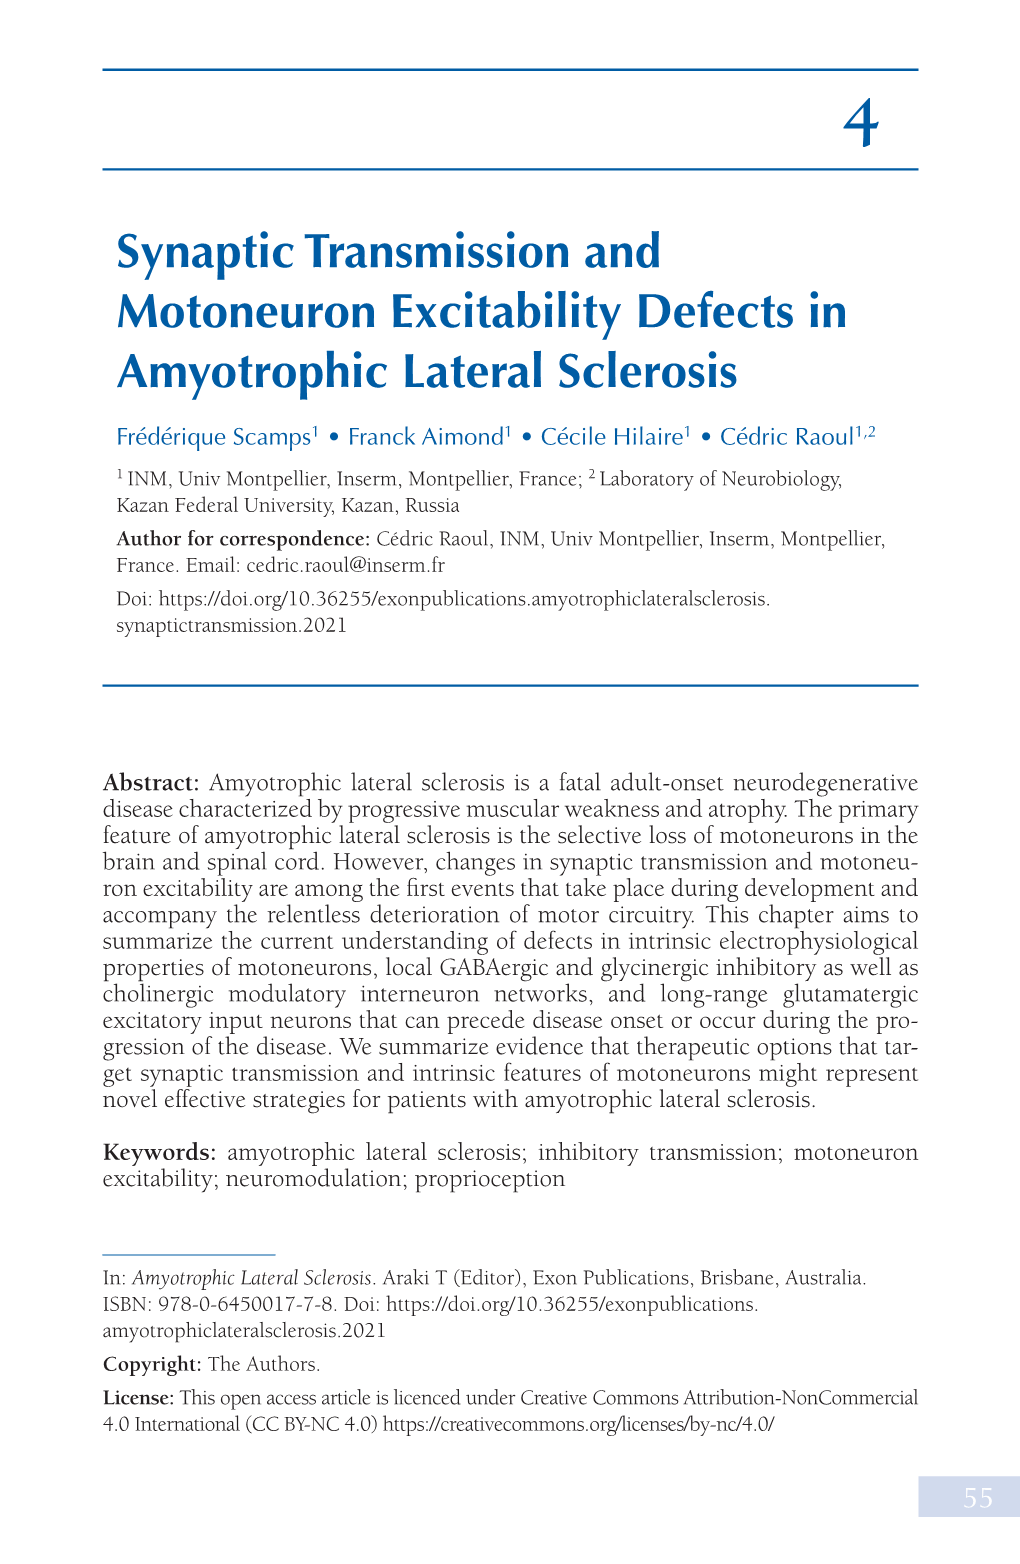 Synaptic Transmission and Motoneuron Excitability Defects in Amyotrophic Lateral Sclerosis